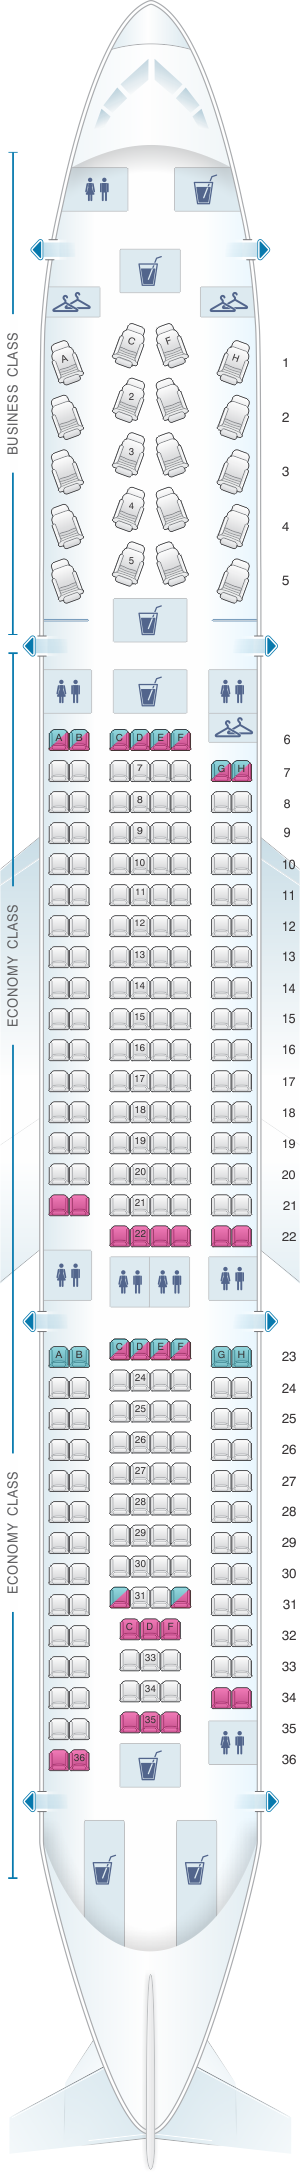 Seat map for US Airways Airbus A330 200